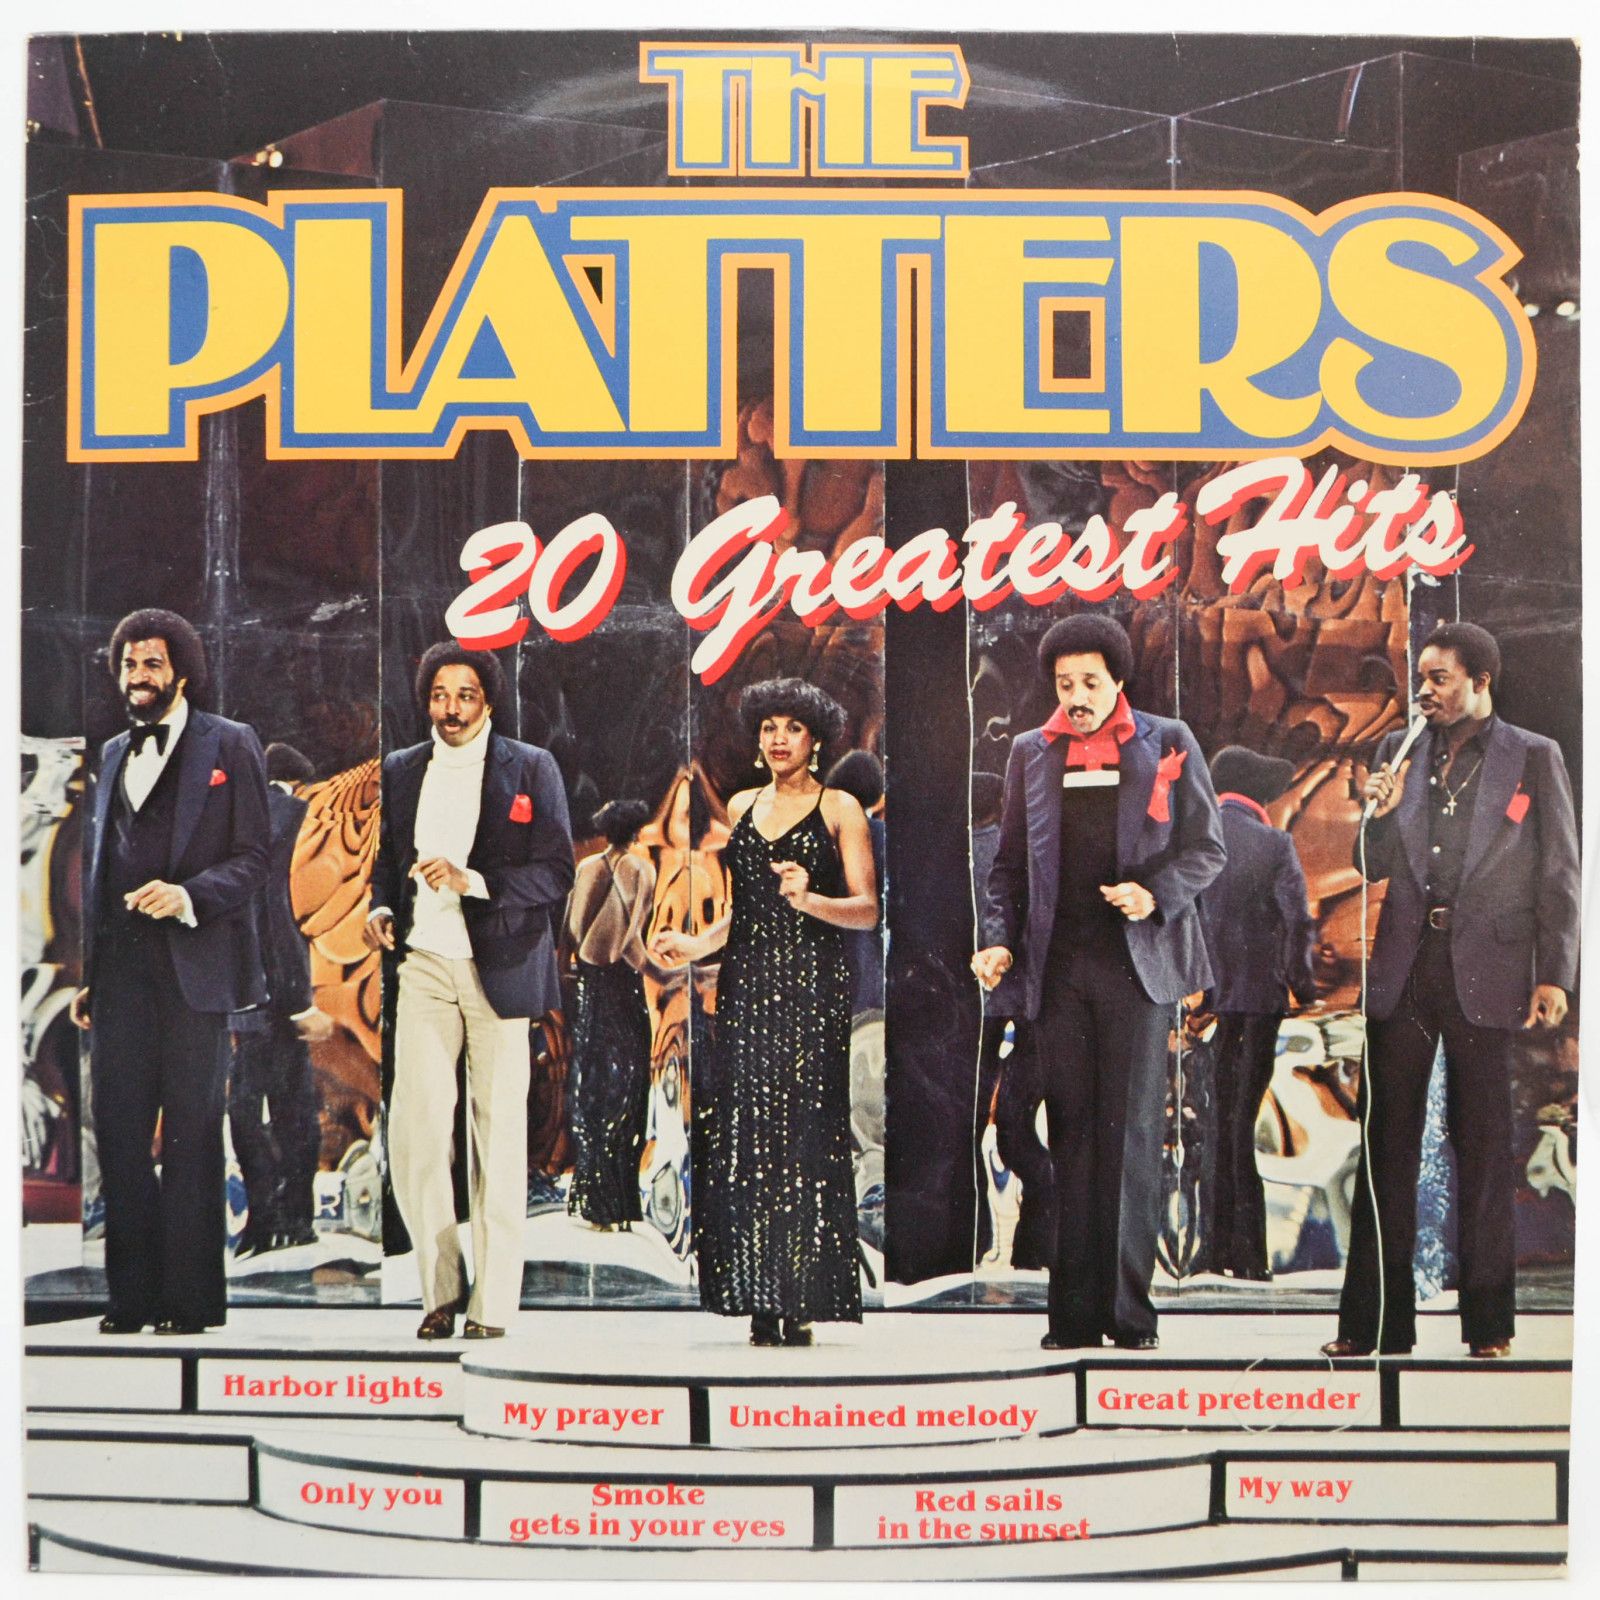 Platters — 20 Greatest Hits, 1982